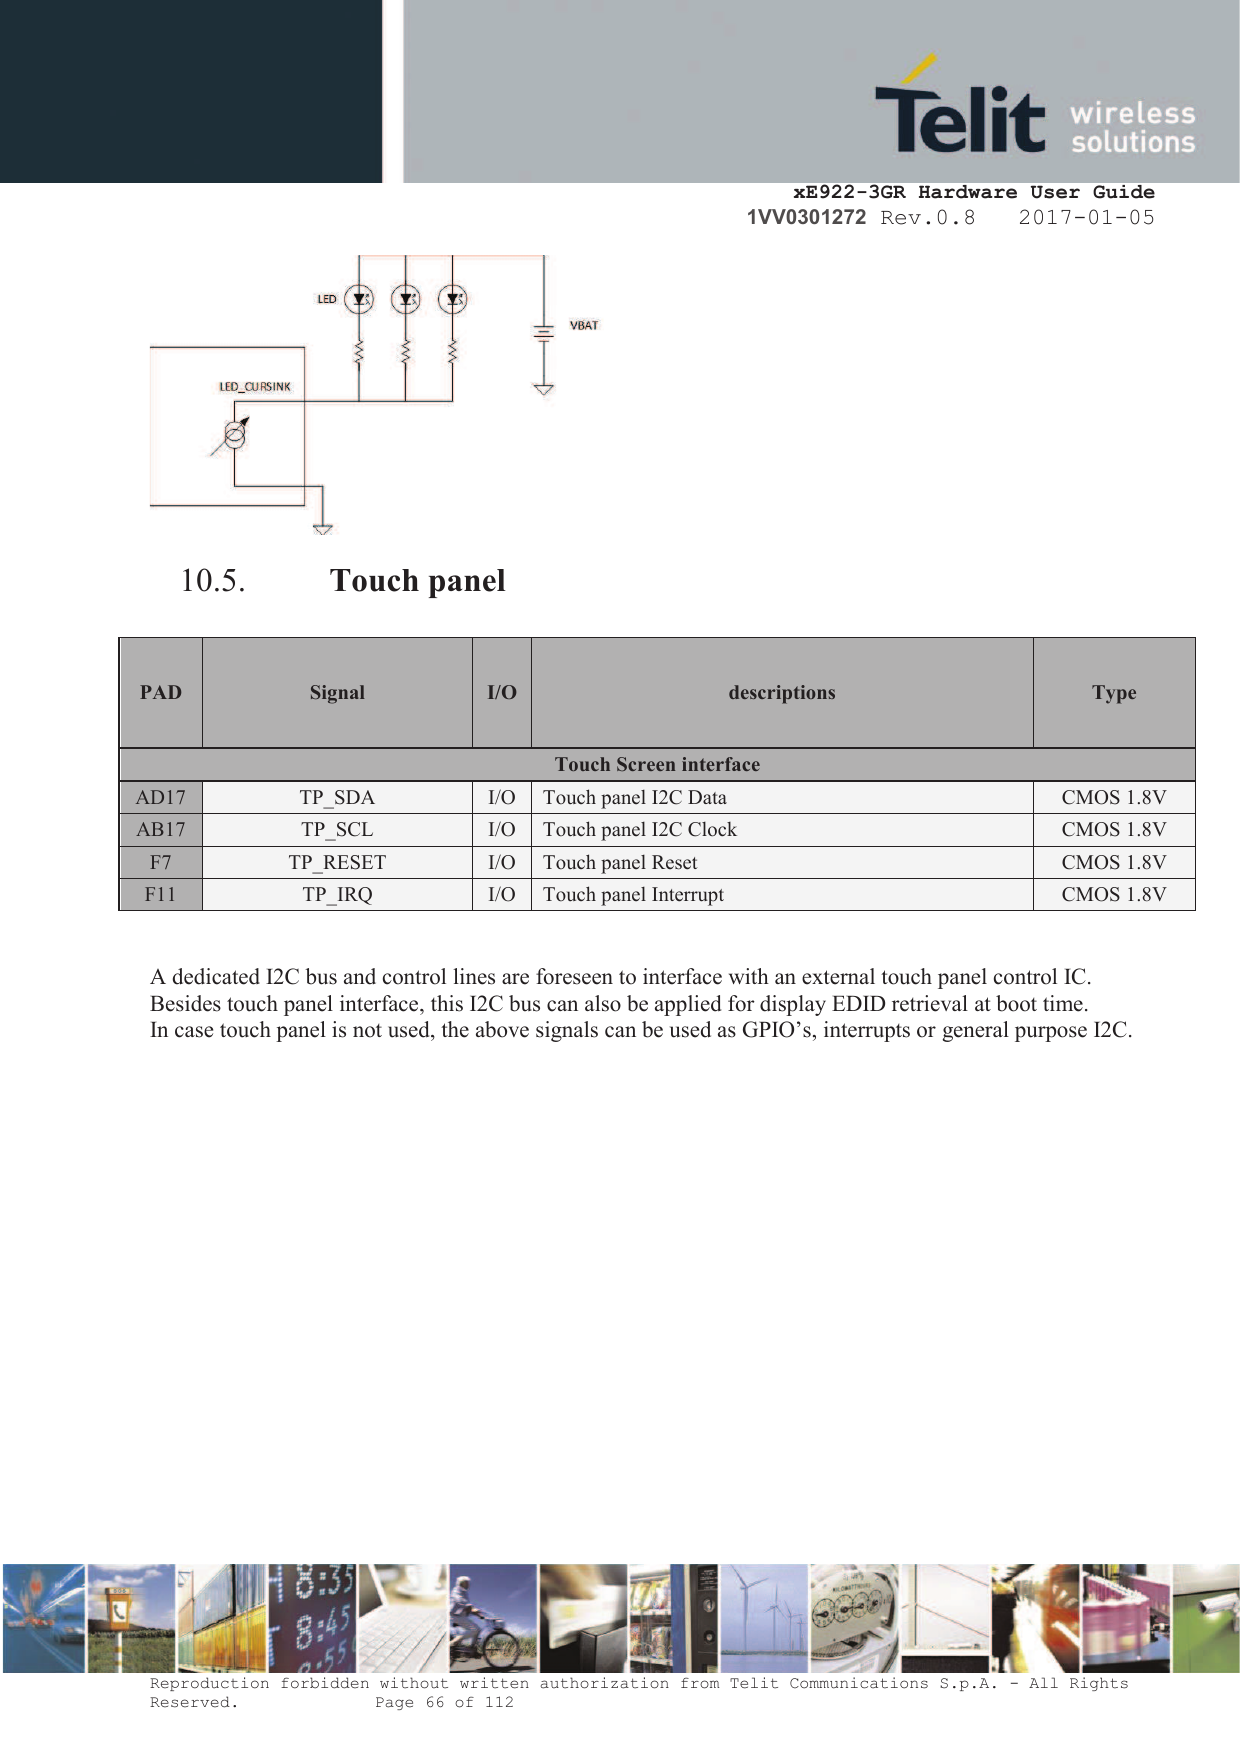     xE922-3GR Hardware User Guide 1VV0301272 Rev.0.8   2017-01-05 Reproduction forbidden without written authorization from Telit Communications S.p.A. - All Rights Reserved.    Page 66 of 112   10.5. Touch panel   PAD Signal I/O descriptions  Type Touch Screen interface AD17 TP_SDA I/O Touch panel I2C Data CMOS 1.8V AB17 TP_SCL I/O Touch panel I2C Clock CMOS 1.8V F7 TP_RESET I/O Touch panel Reset CMOS 1.8V F11 TP_IRQ I/O Touch panel Interrupt CMOS 1.8V   A dedicated I2C bus and control lines are foreseen to interface with an external touch panel control IC. Besides touch panel interface, this I2C bus can also be applied for display EDID retrieval at boot time. In case touch panel is not used, the above signals can be used as GPIO’s, interrupts or general purpose I2C.  